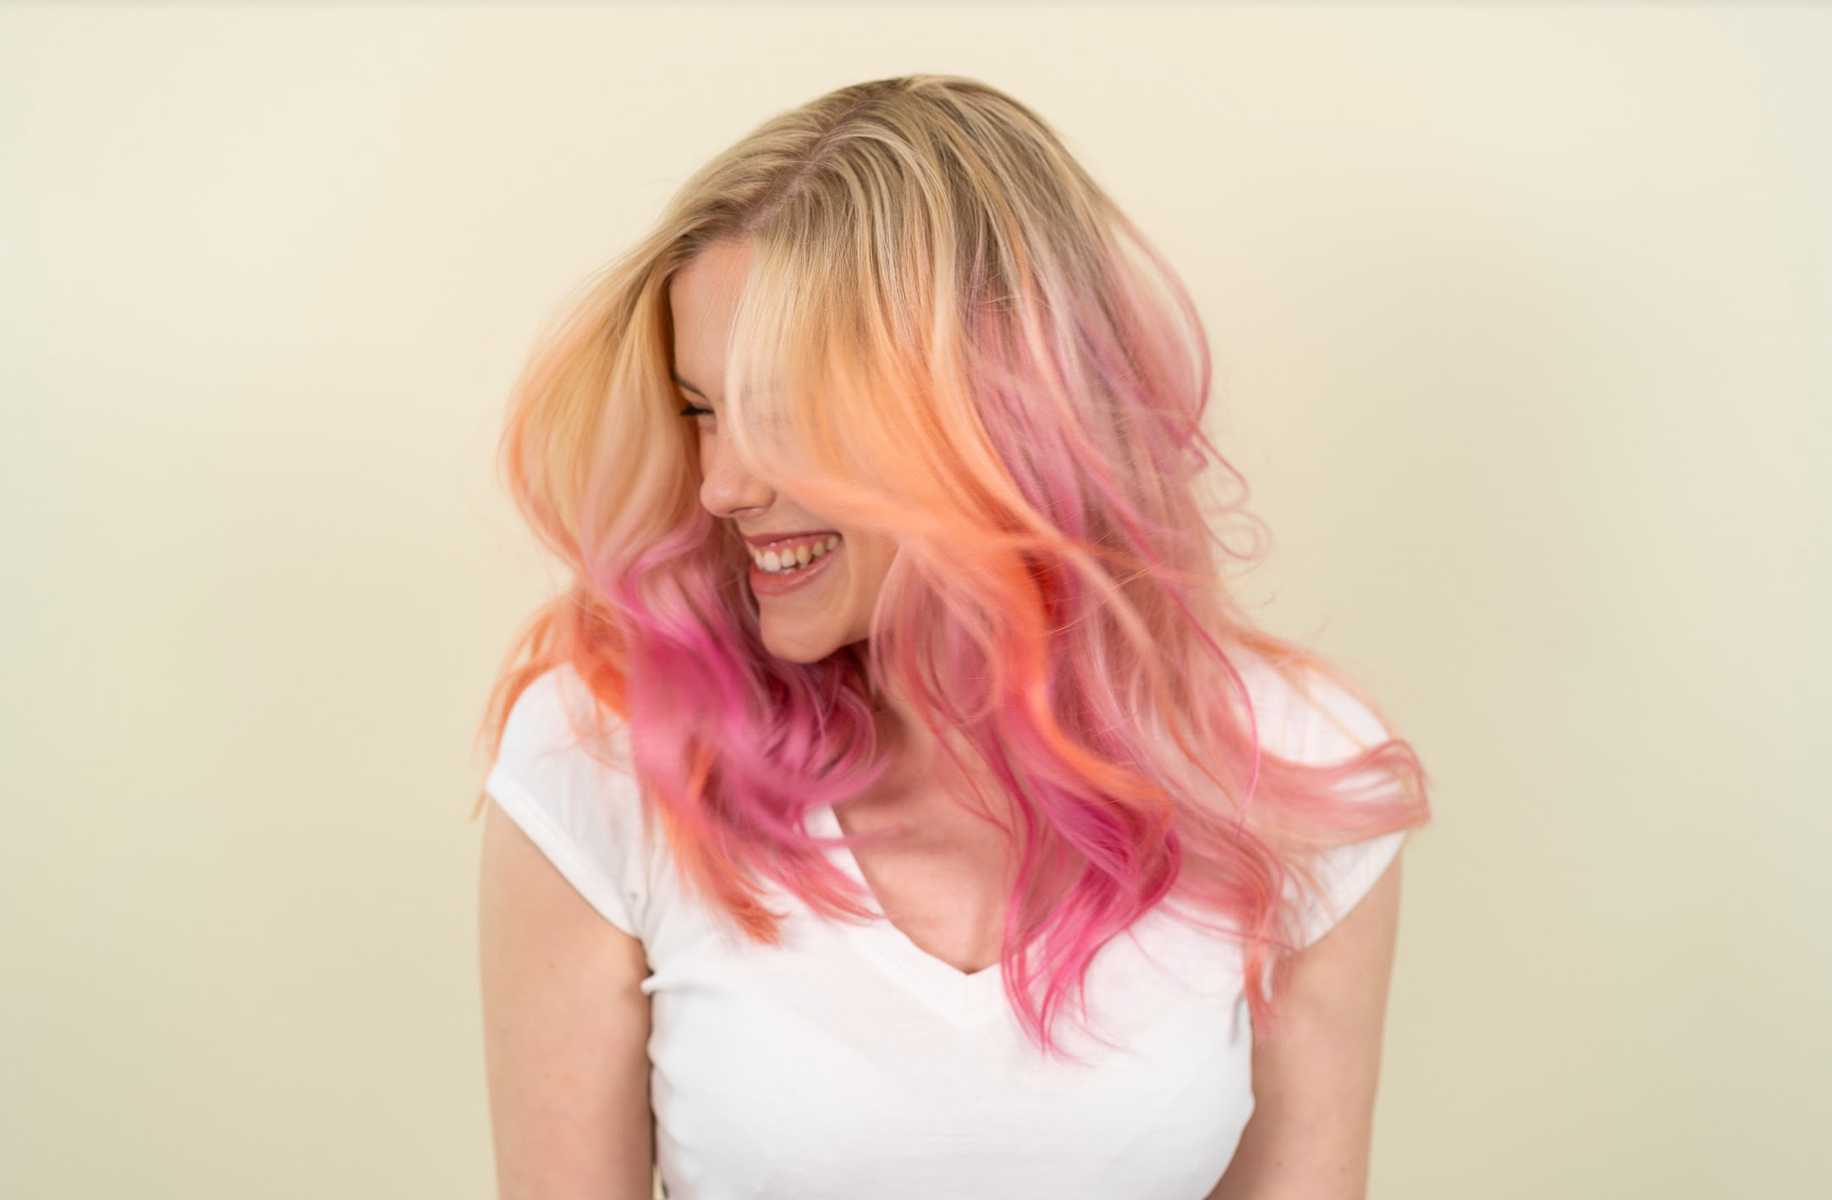 Fun summer hair colour ideas and trends from Josh Wood experts